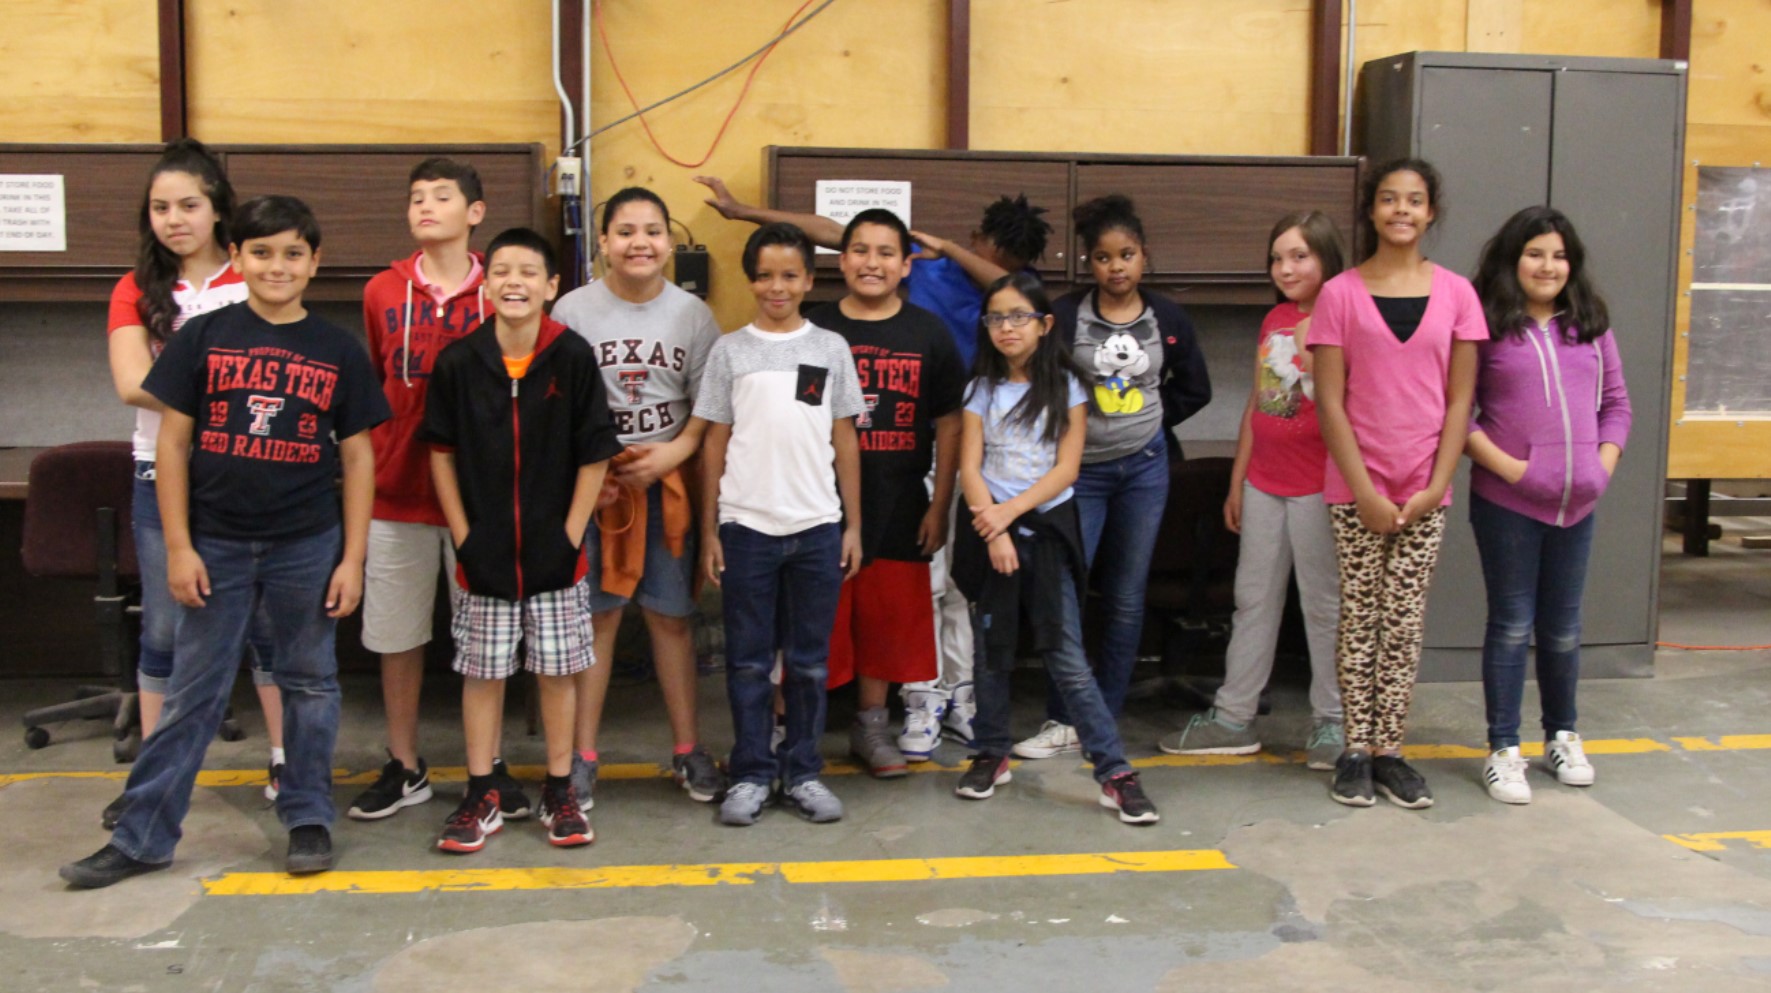 Bayless Elementary School (Lubbock) recently visited NWI research facilities to learn about the wind research and their possible future as scientists.